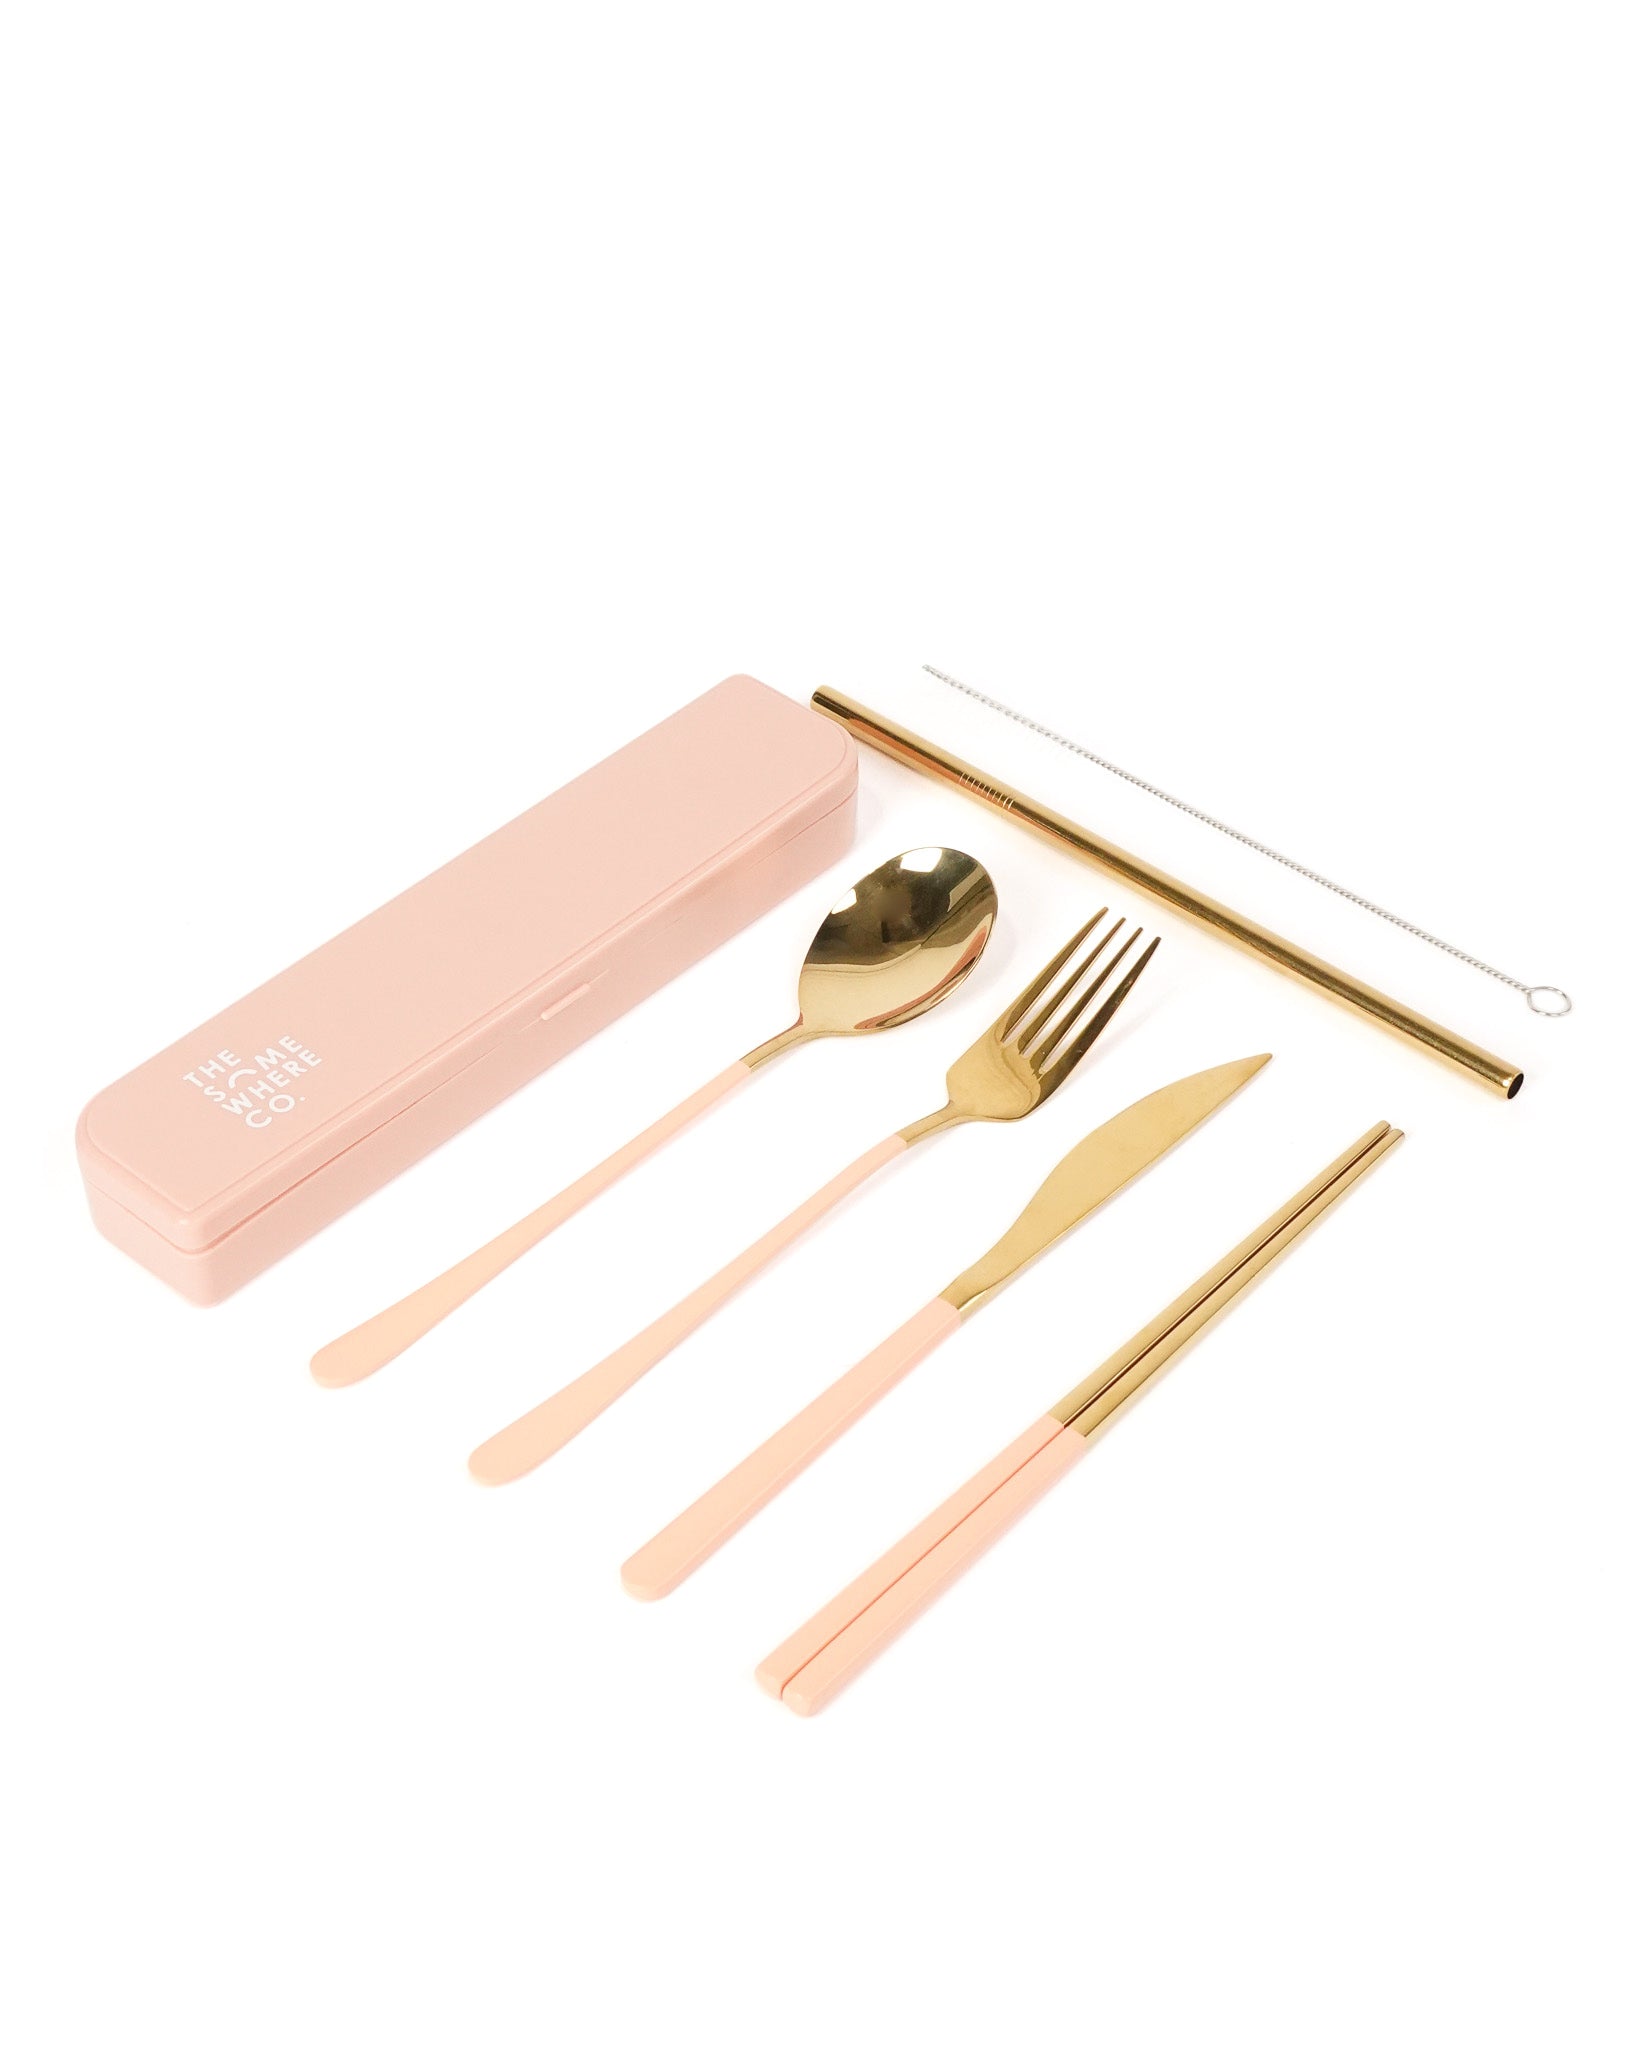 Cutlery Kit - Gold with Blush Handle